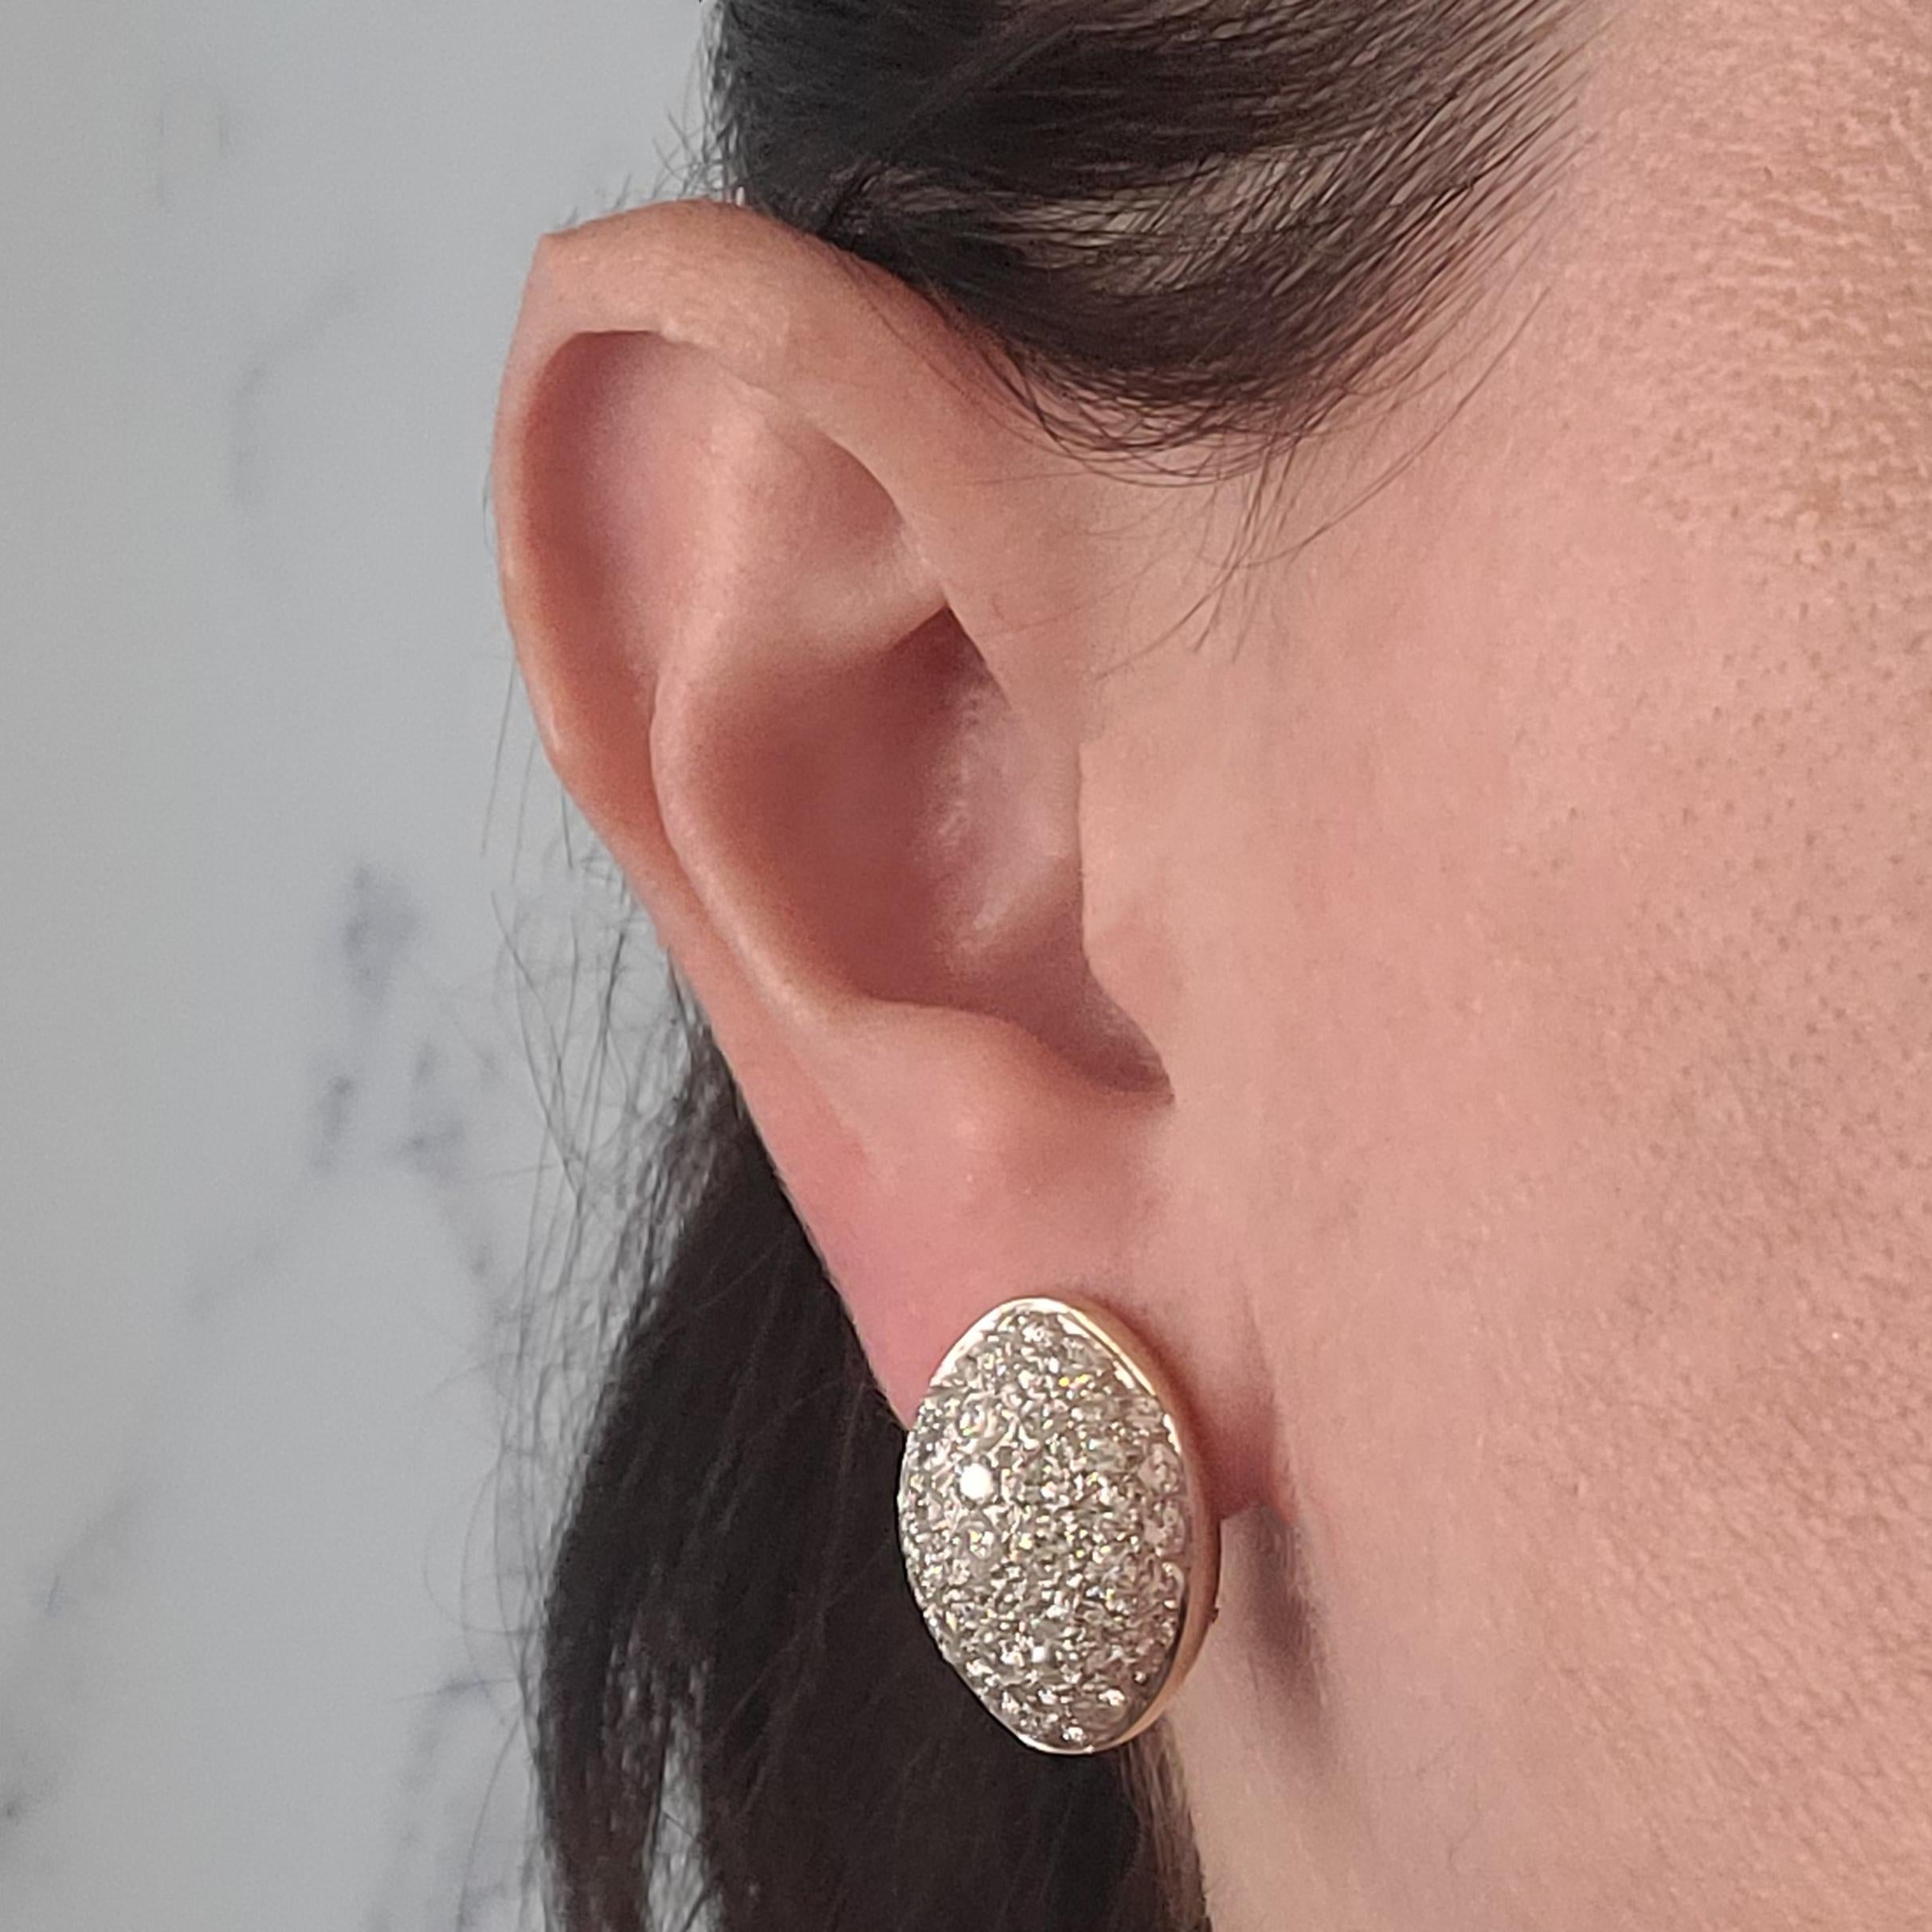 18 Karat Yellow Gold Domed Earrings Featuring 80 Round Brilliant Cut Pave Set Diamonds Of VS Clarity & G/H Color Totaling Approximately 5.00 Carats. 14 Karat Yellow Gold Omega Clip Backs With Pierced Post; Post Removed Upon Request. Finished Weight